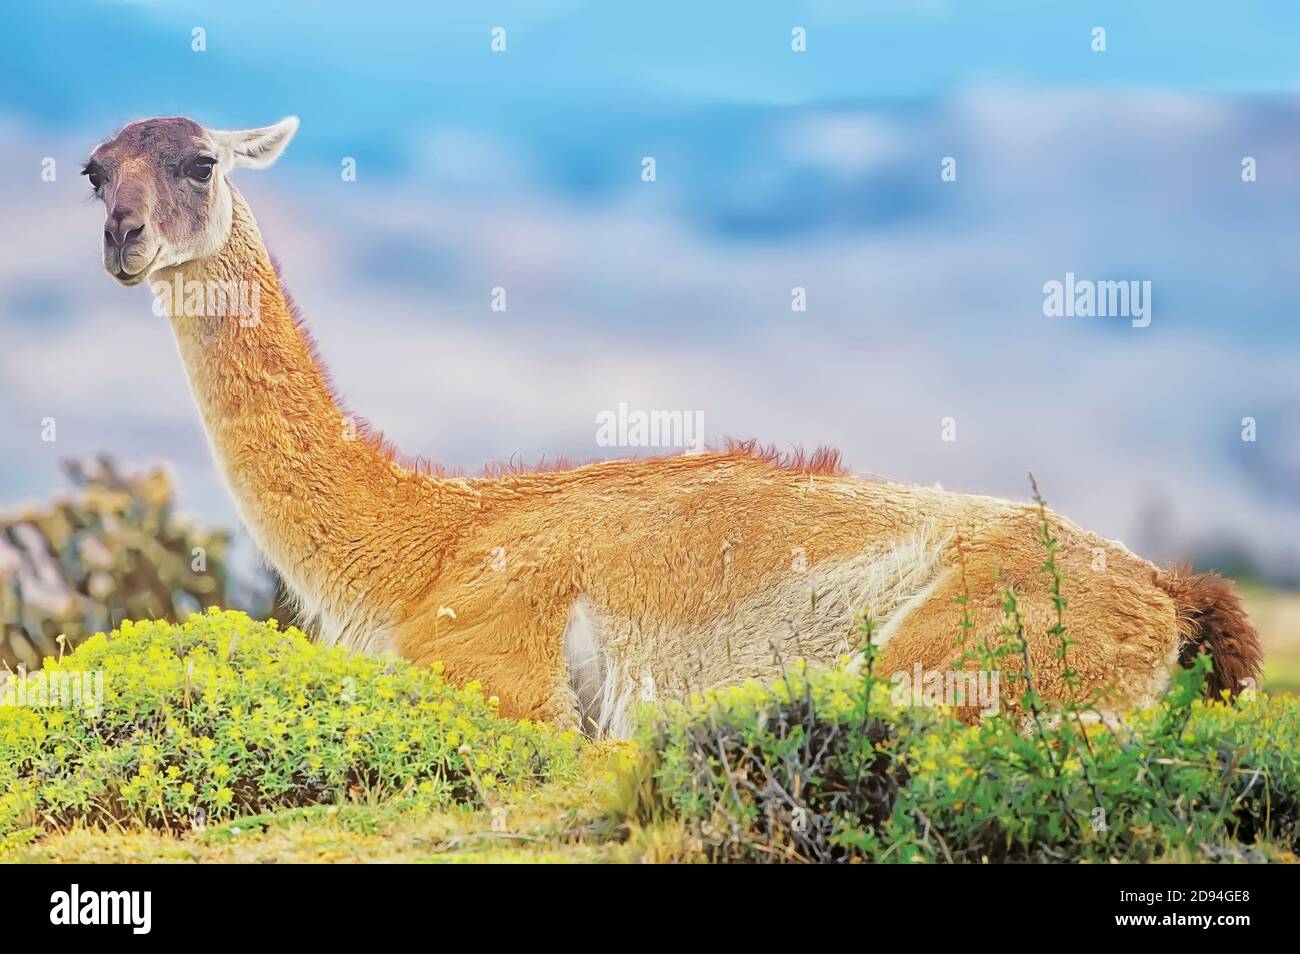 A guanaco (Lama guanicoe) taking a rest, Torres del Paine National Park, Chile, South America Stock Photo